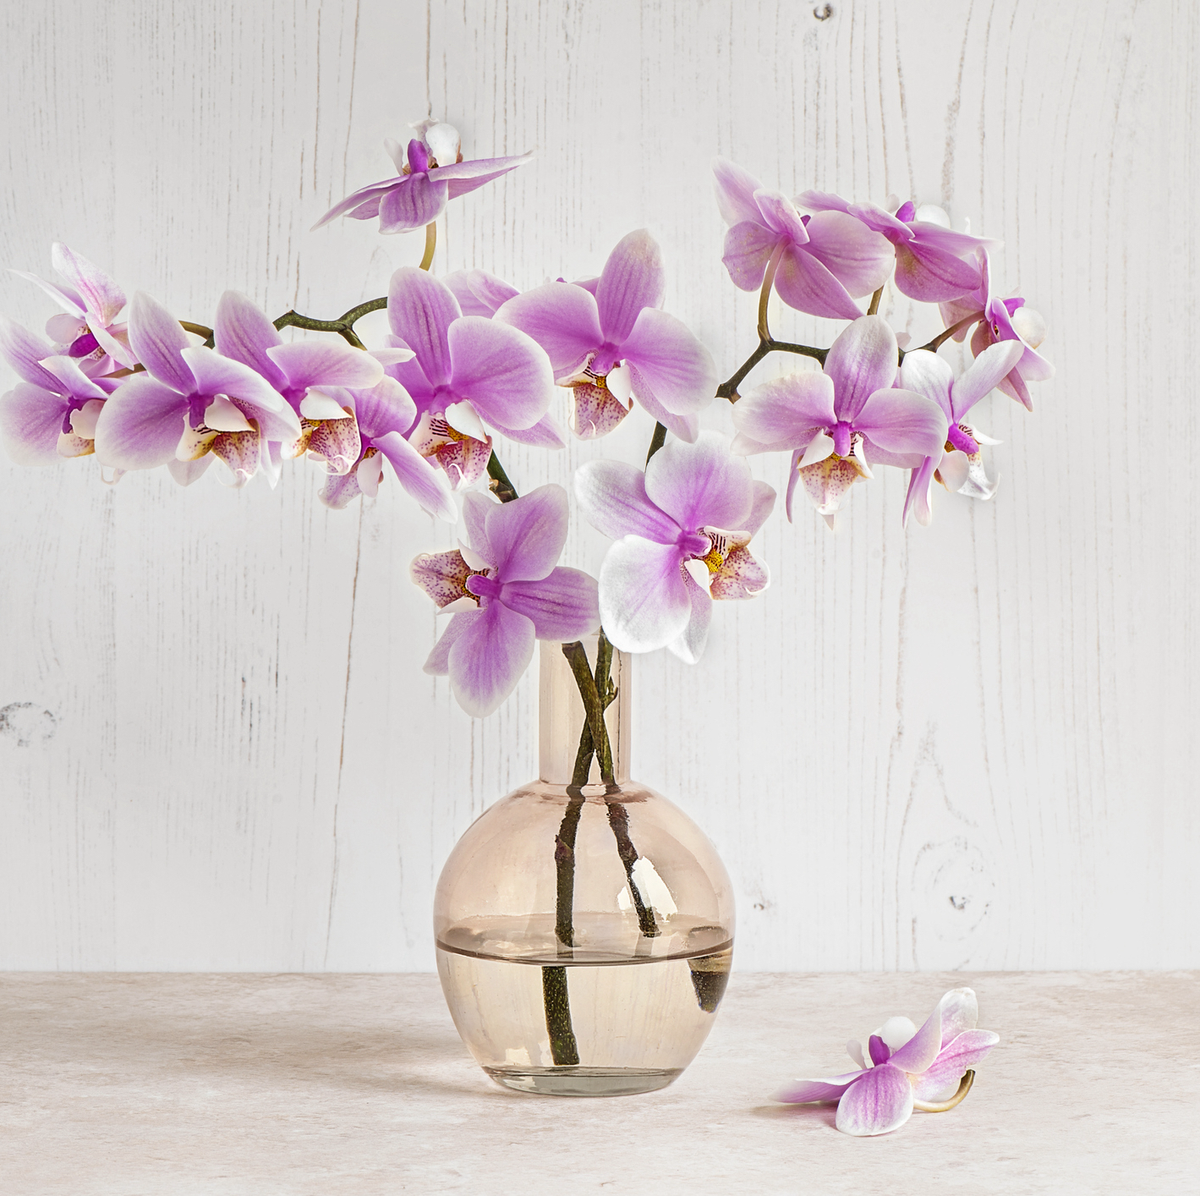 How to Care for Orchids - Tips for Growing Orchids